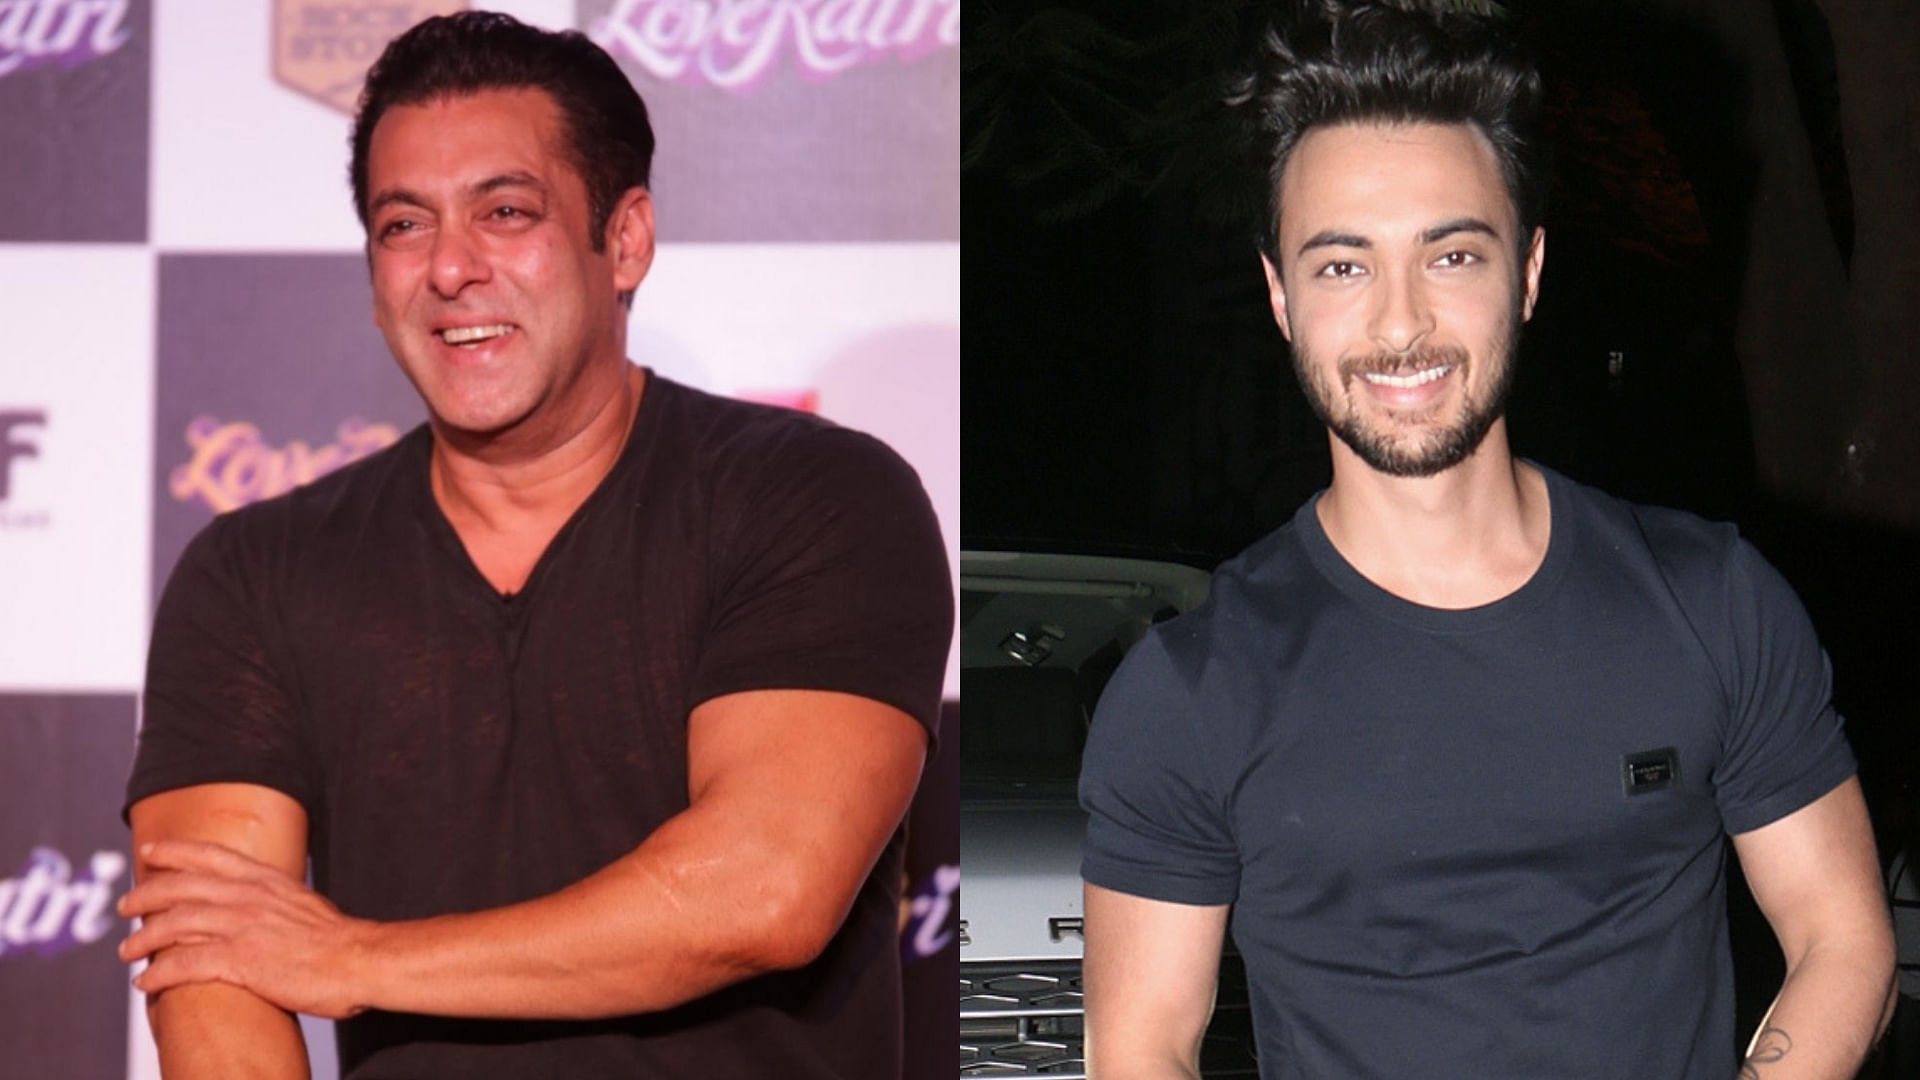 Salman Khan is set to feature Aayush Sharma in an upcoming film.